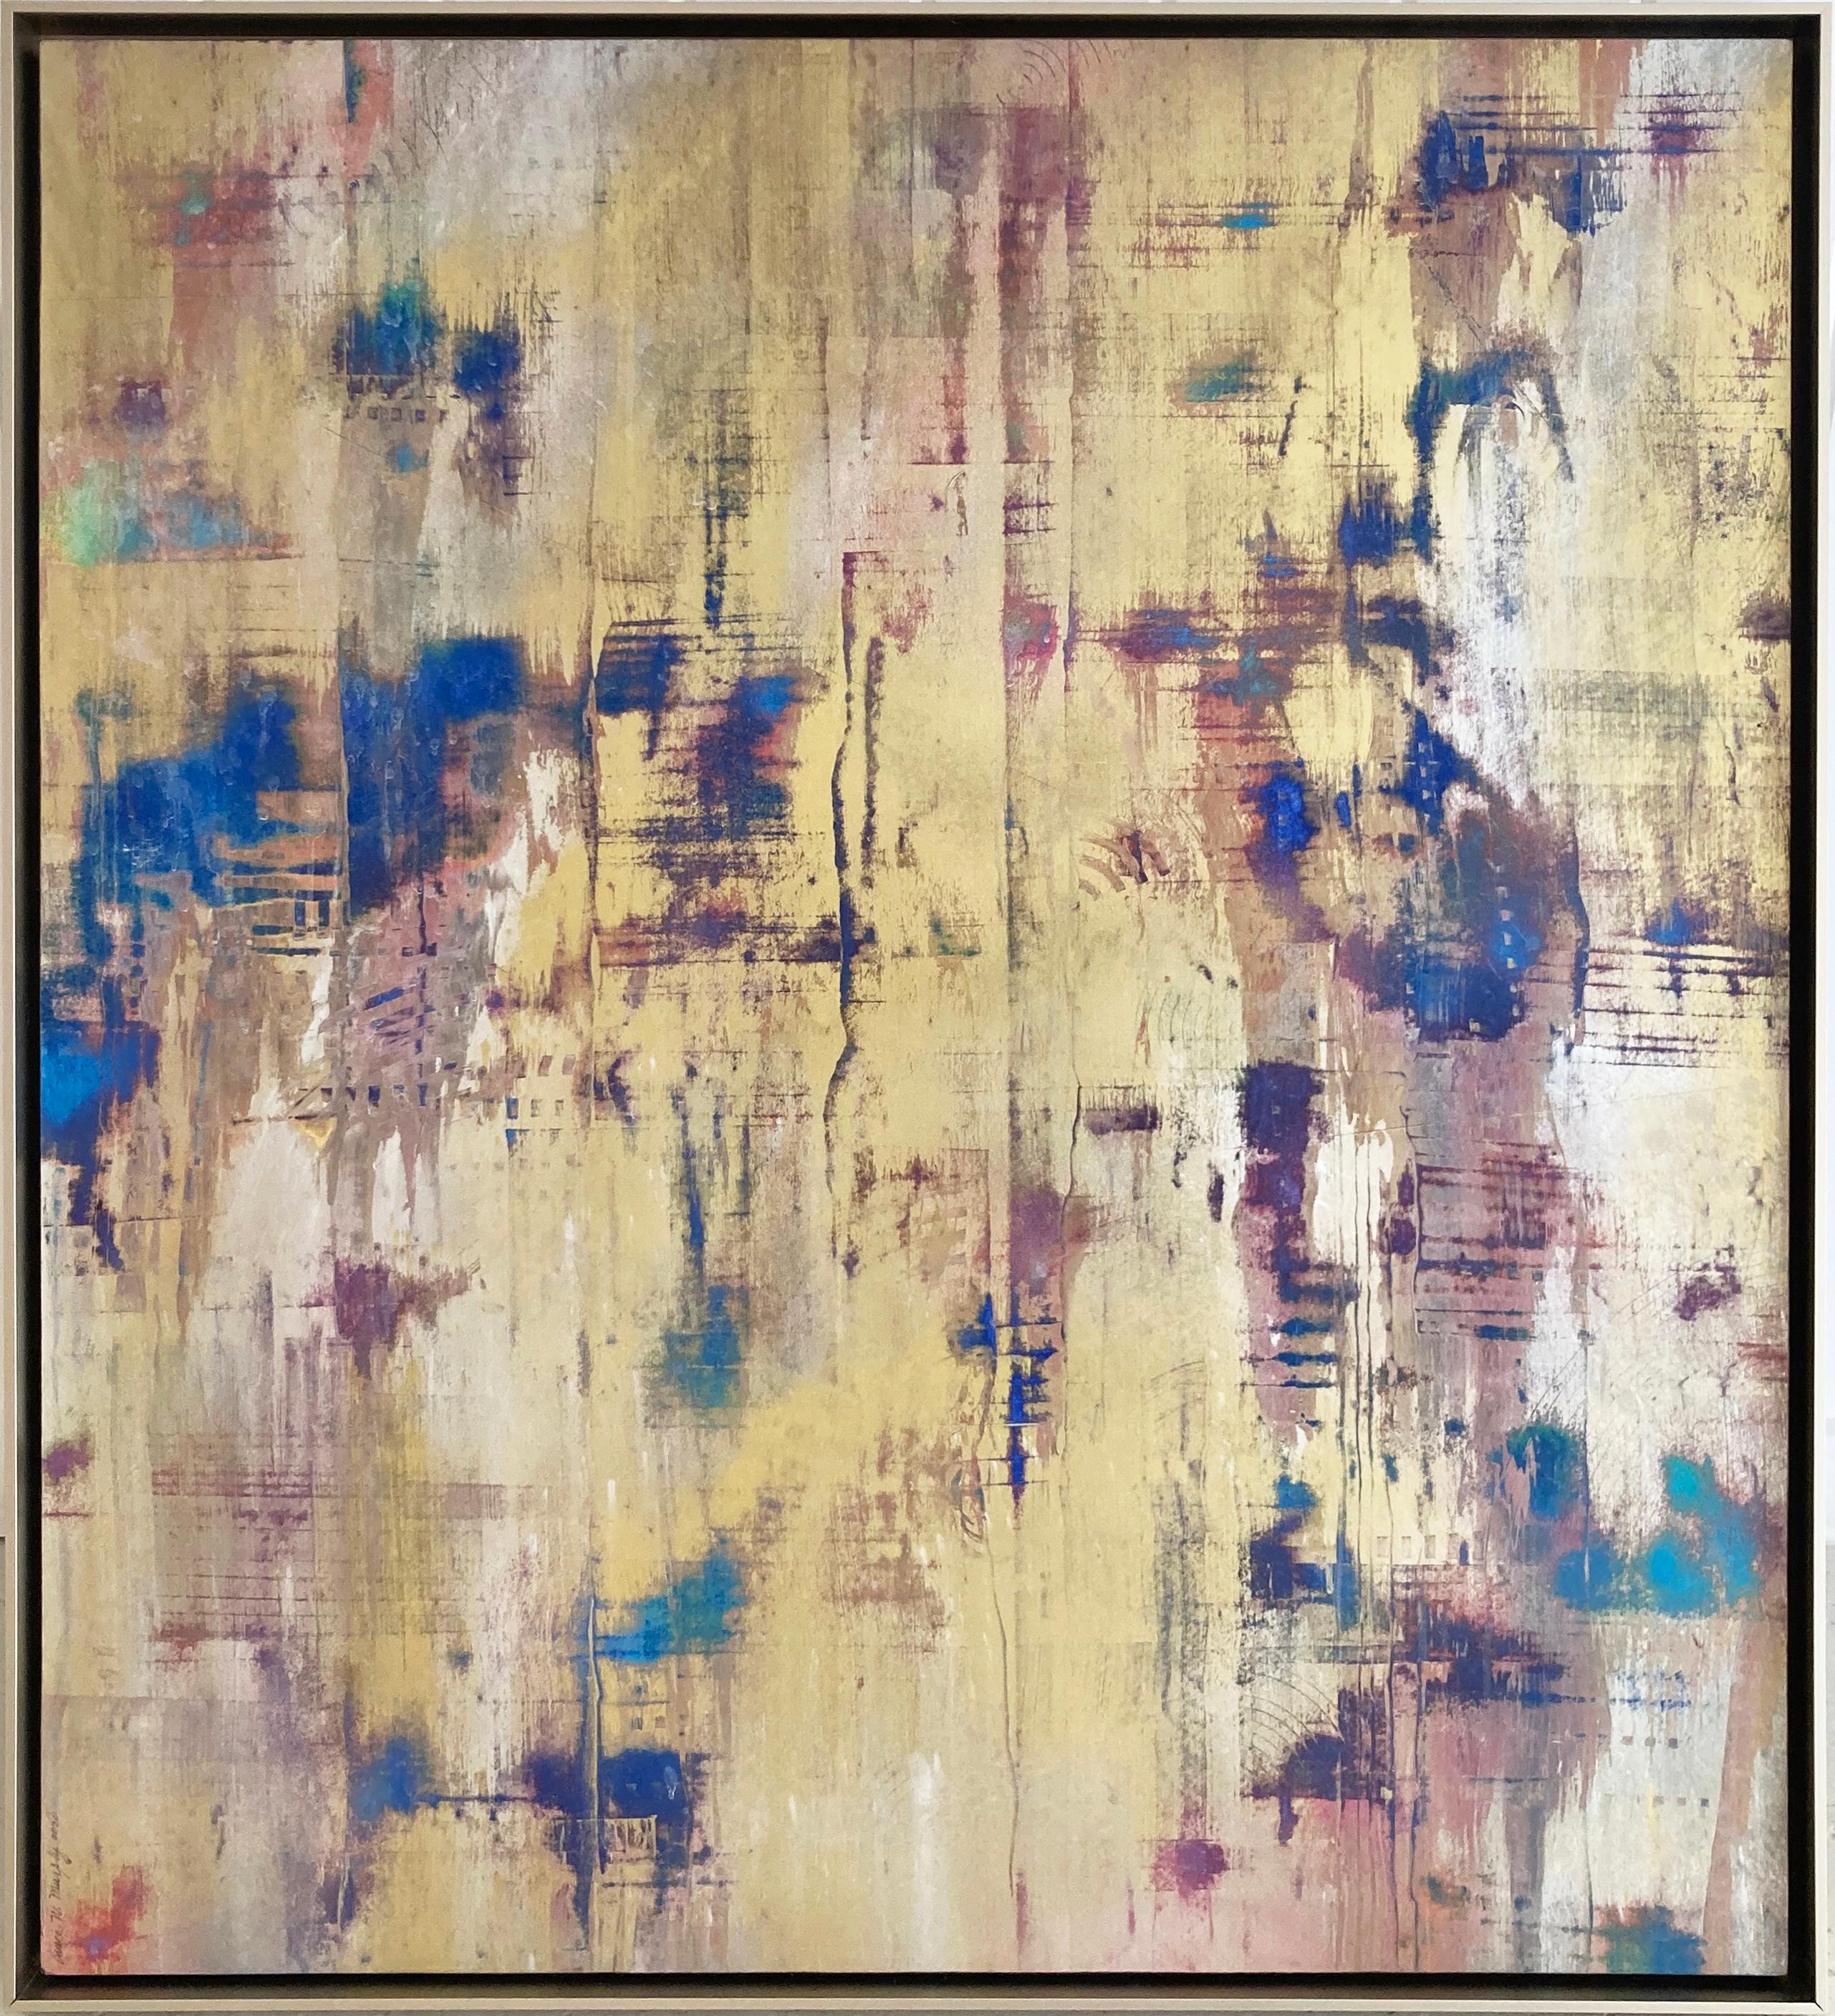 Bruce Murphy Abstract Drawing - Open & Empty: Silver & Gold Abstract Expressionist Painting with Jewel Tones